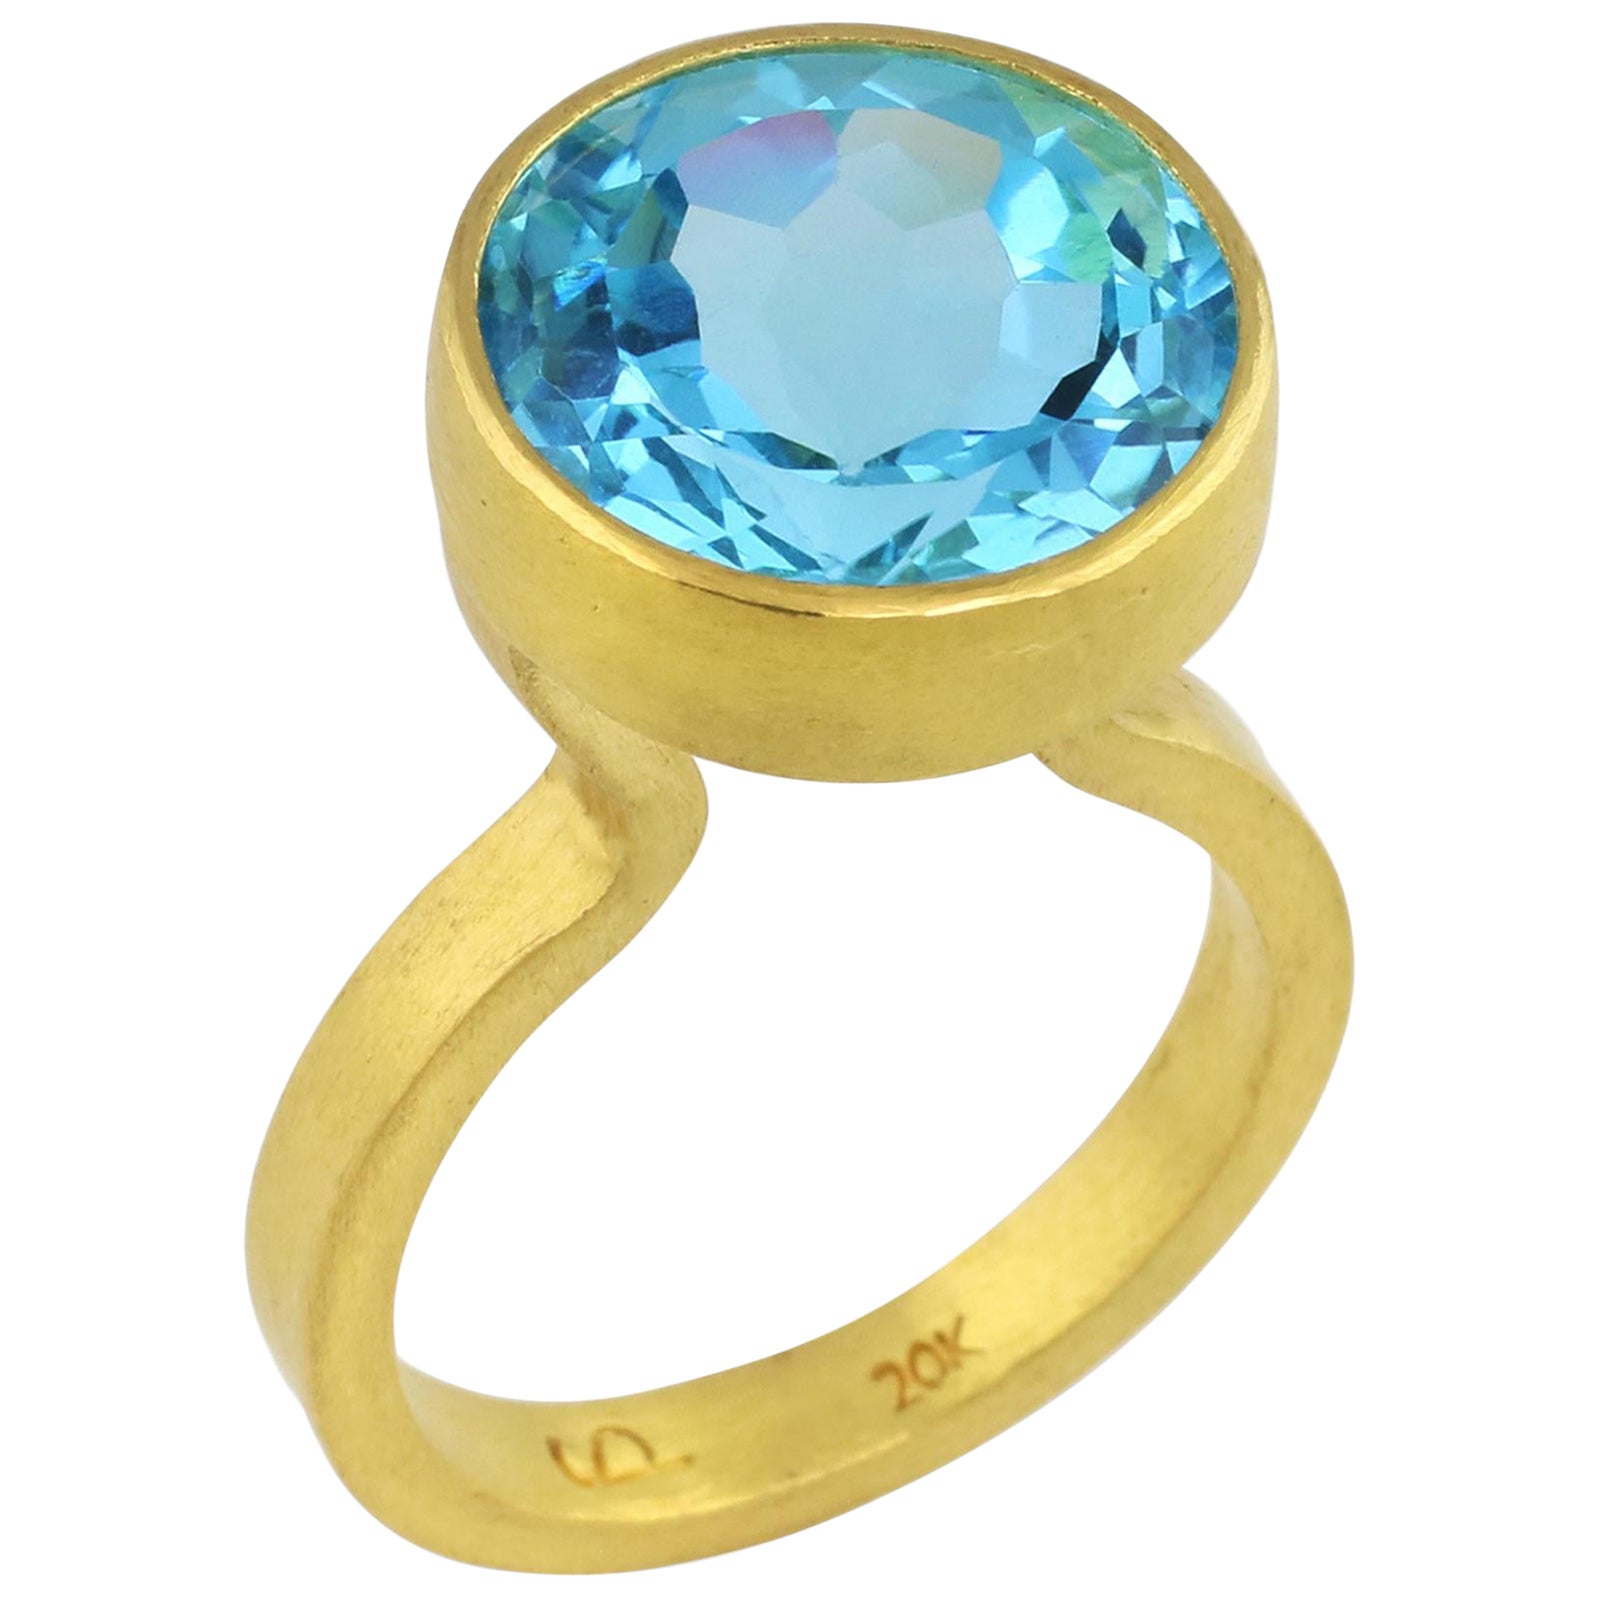 PHILIPPE SPENCER 11.05 Ct. Blue Topaz in 22K and 20K Gold Statement Ring